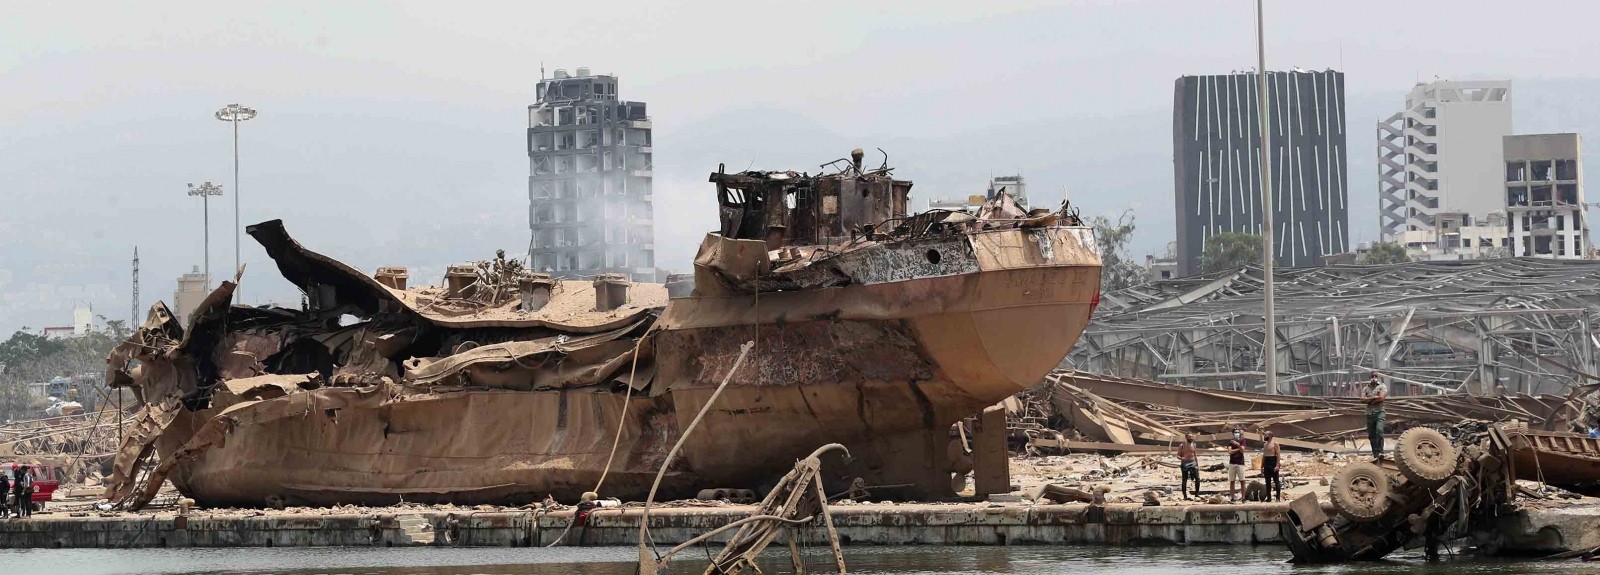 People stand by the wreckage of a ship at the devastated site of the explosion in the port of Beirut, Lebanon, Thursday Aug.6, 2020. (AP Photo/Thibault Camus, Pool)